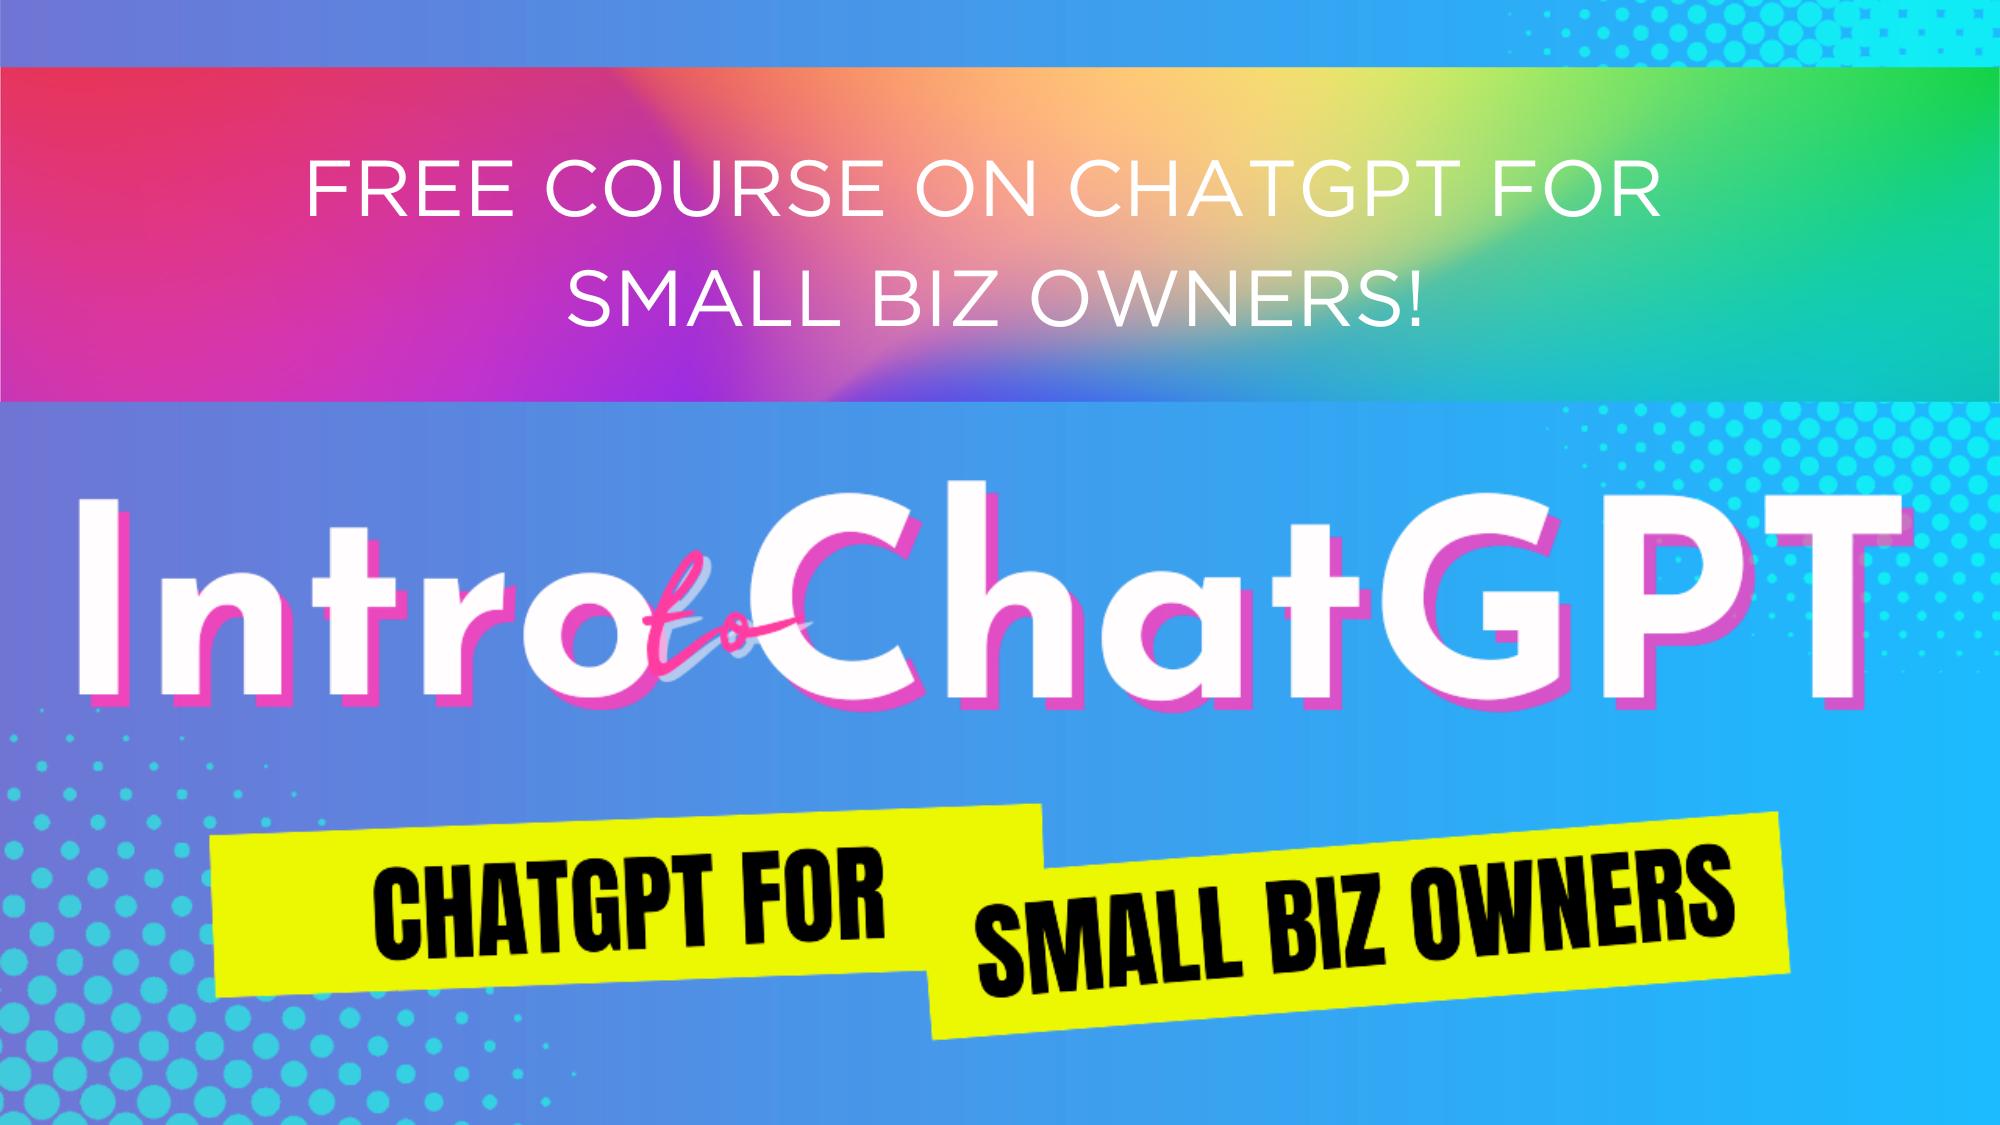 Free Course on ChatGPT for Small Biz Owners!